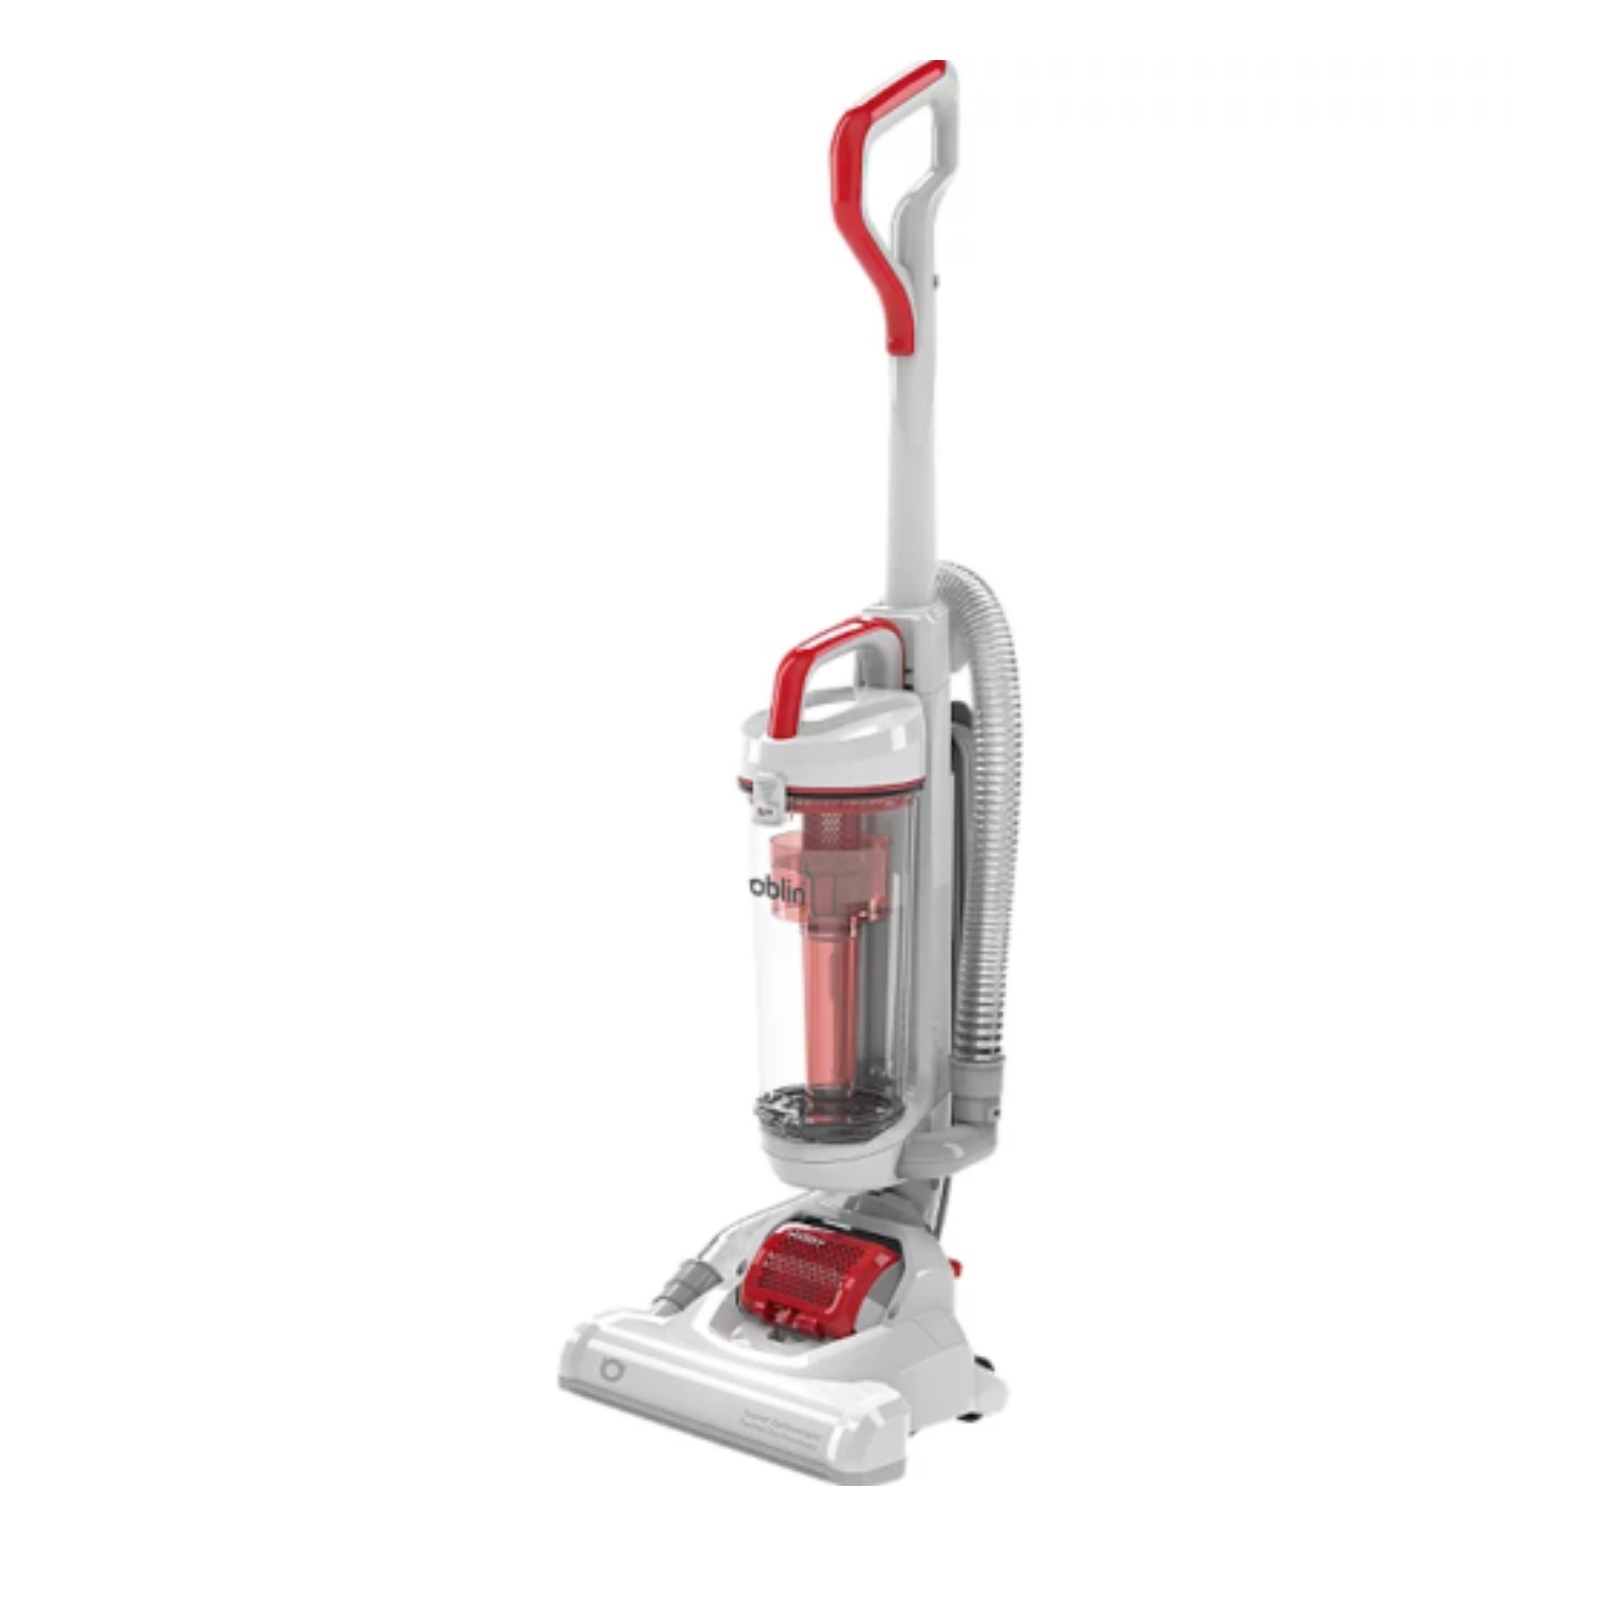 Goblin GVU401R Upright Vacuum Cleaner White and Red - Kettle and ...